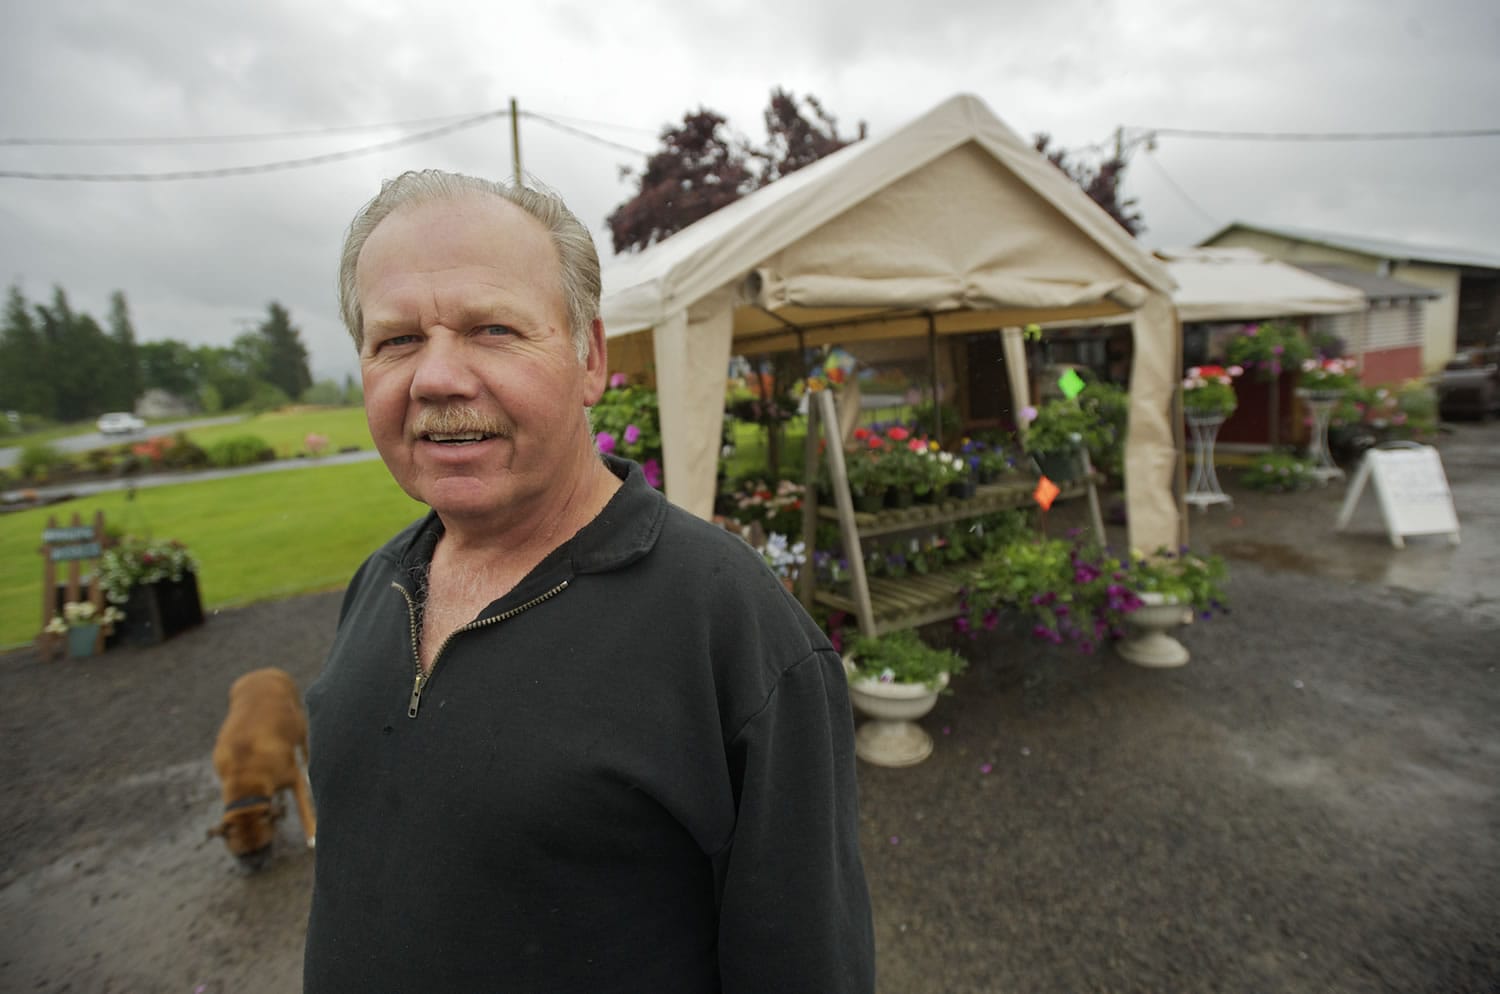 Proebstel farmer Gary Boldt, president of the Clark-Cowlitz County Farm Bureau, said a proposed code change that would allow roadside farm stands to be as large as 1,000 square feet doesn't go far enough. He told the Clark County commissioners Tuesday that he'd like farm stands to be as large as 2,000 square feet.